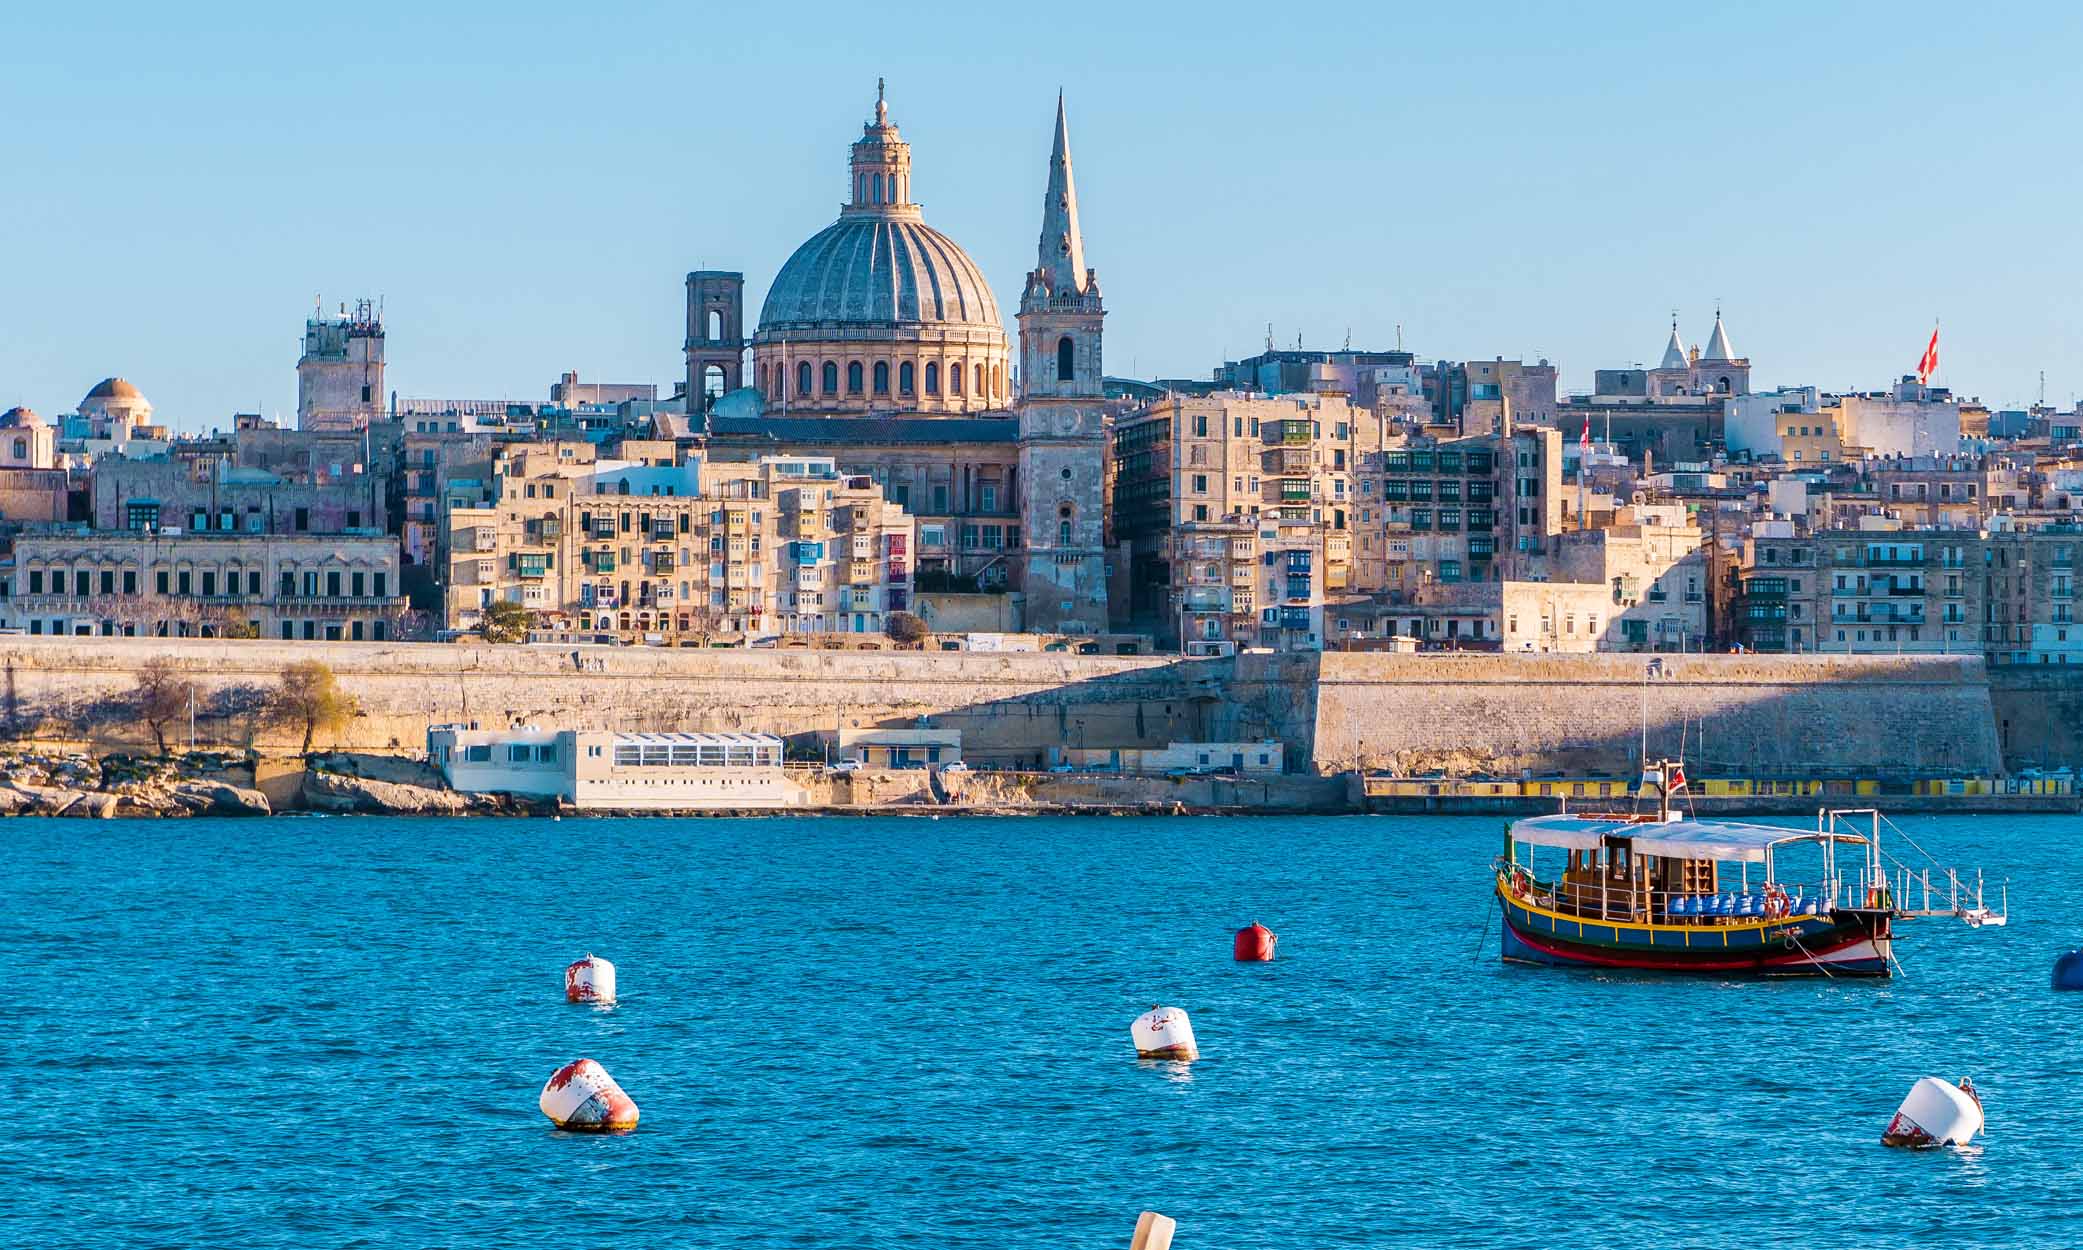 You are eligible for a Maltese passport through Maltese Exceptional Investor Naturalization.